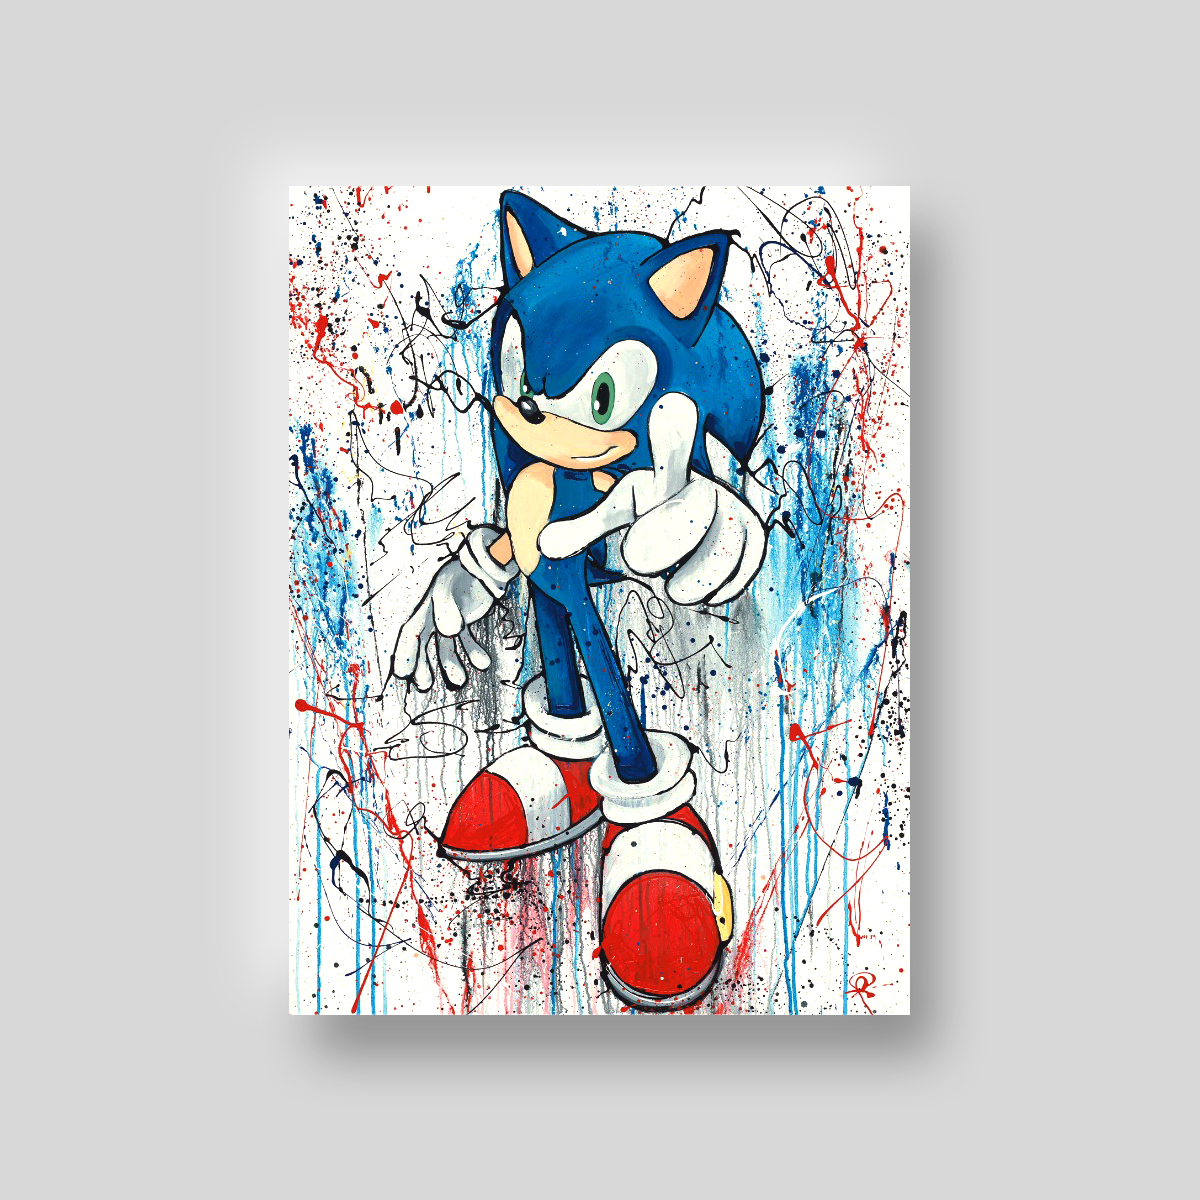 Watch Out by Paul Kenton, UK contemporary artist, a limited edition print in celebration of Sonic the Hedgehog’s 25th Anniversary